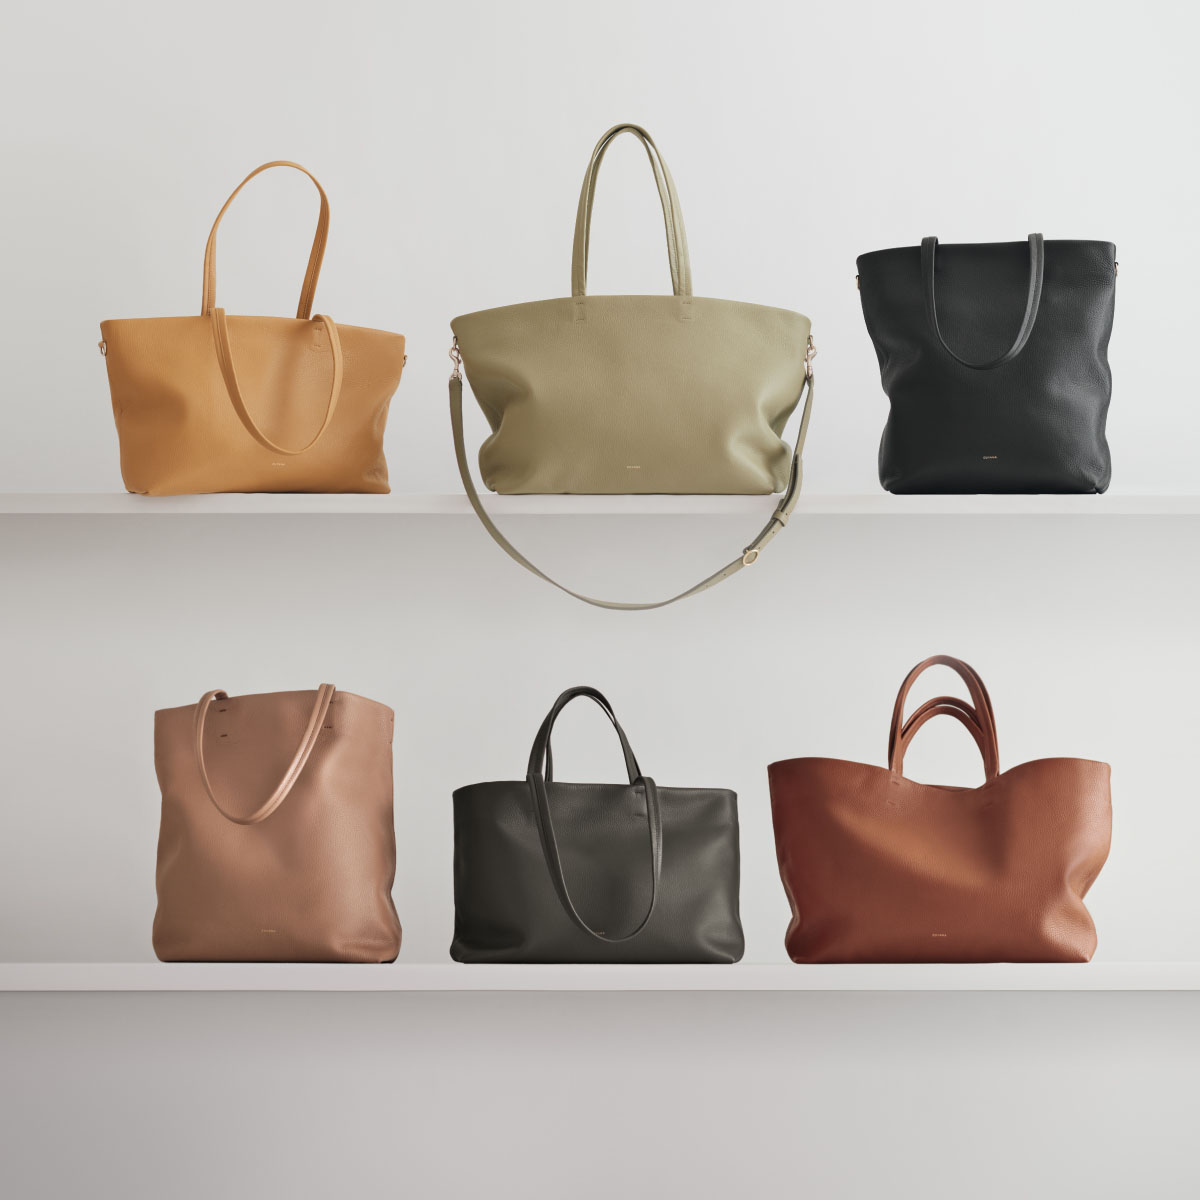 A Review of Cuyana's Classic Leather Zipper Tote and Tote